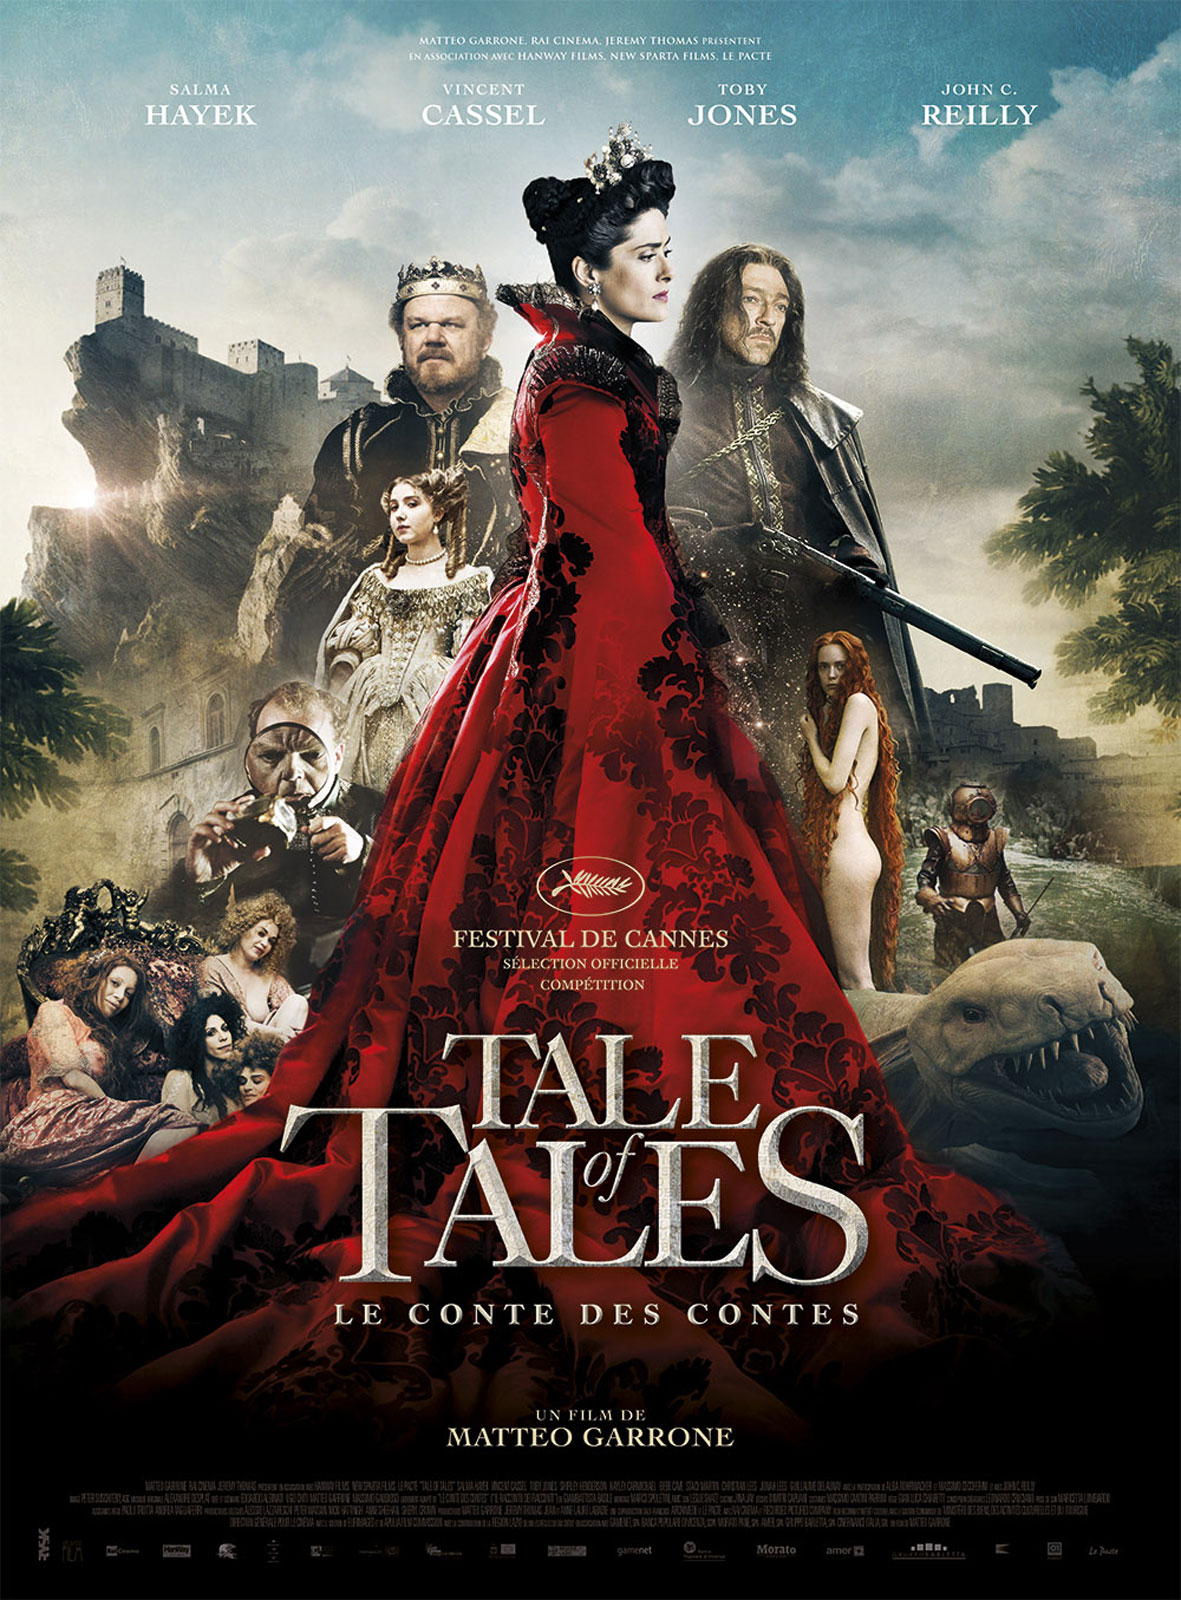 Tale Of Tales film review: truly epic fantasy